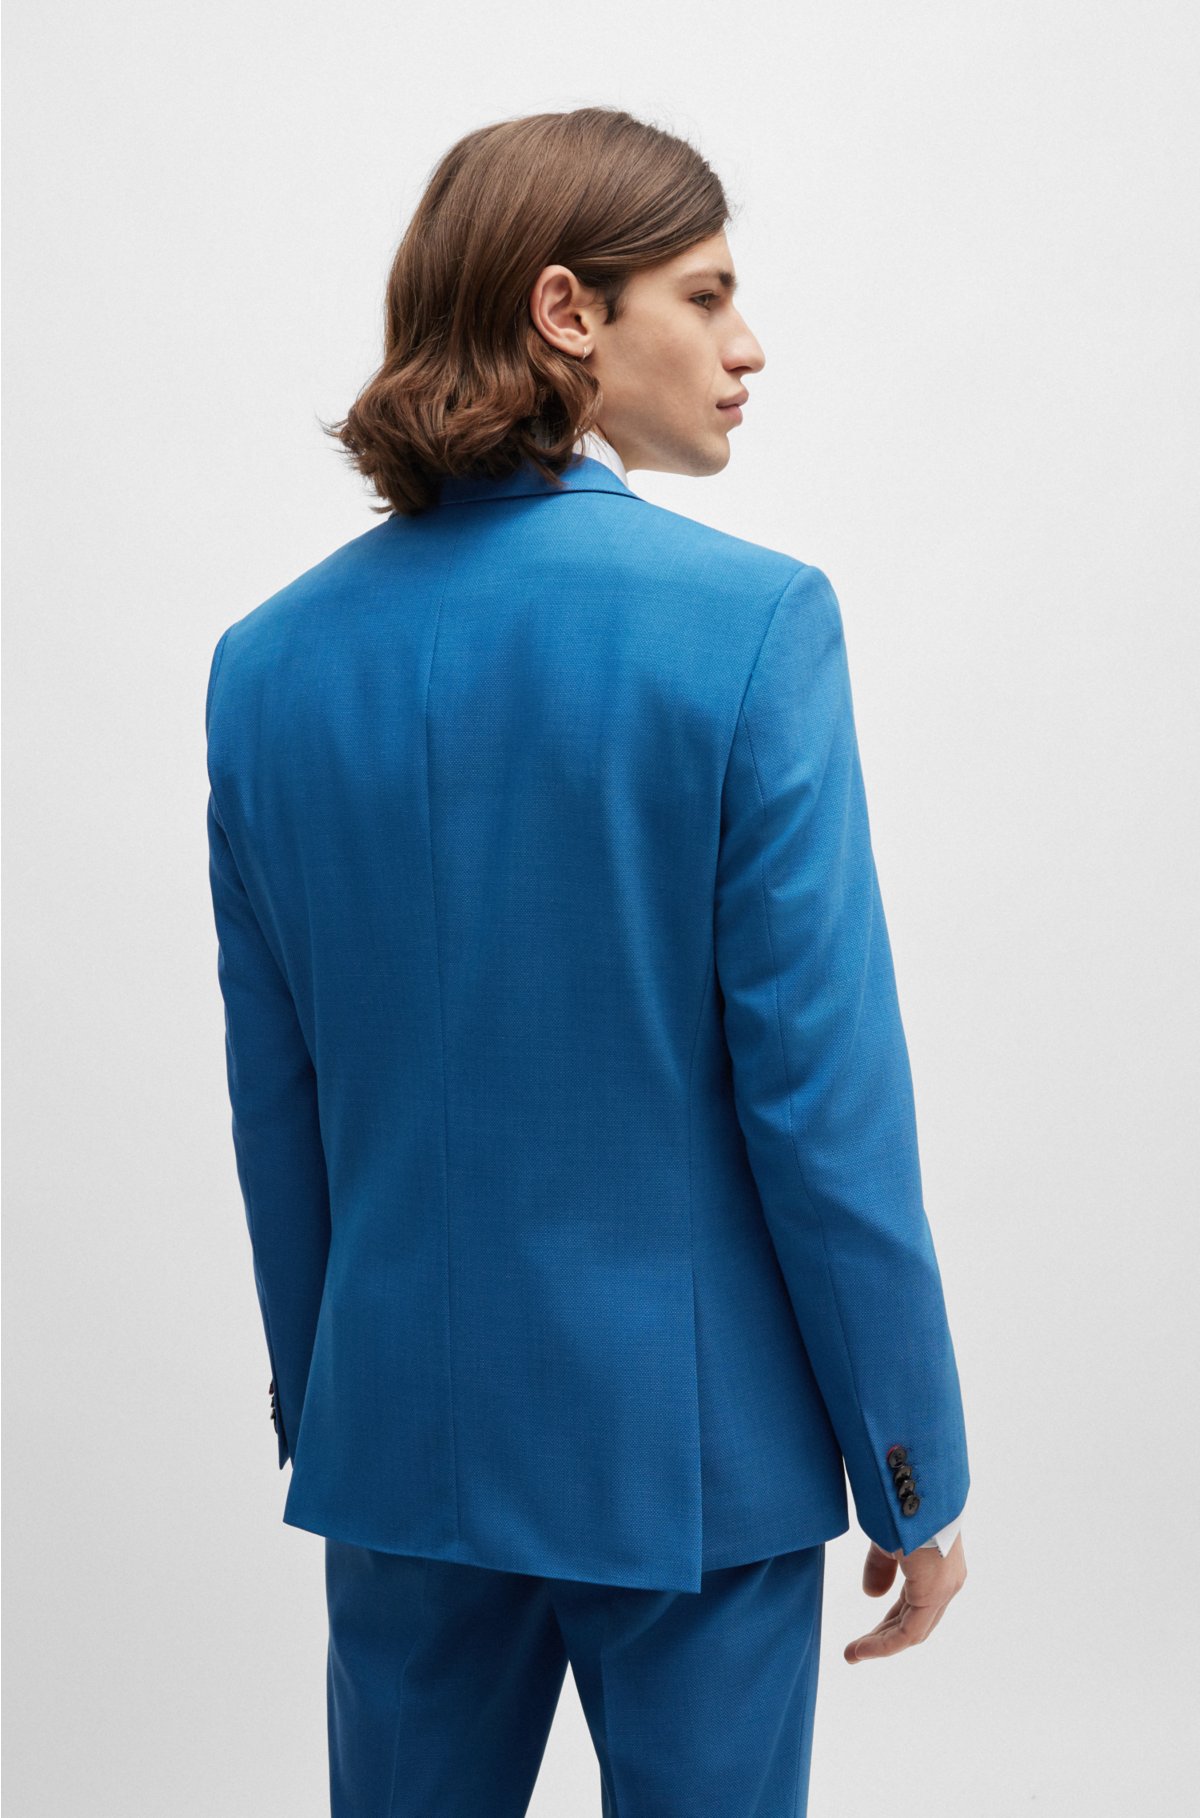 Slim-fit suit in stretch twill, Blue